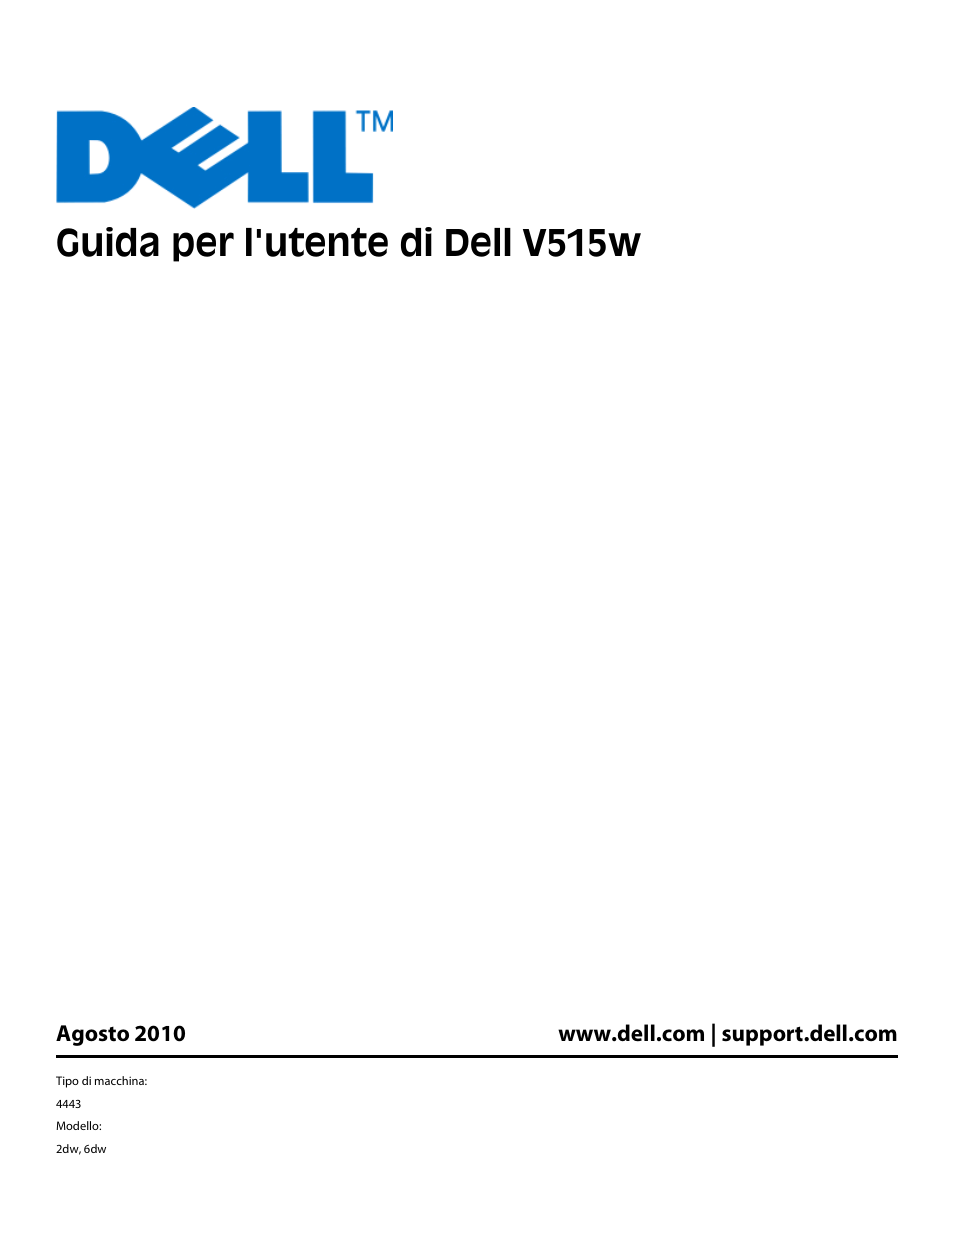 Dell V515w All In One Wireless Inkjet Printer Manuale d'uso | Pagine: 177